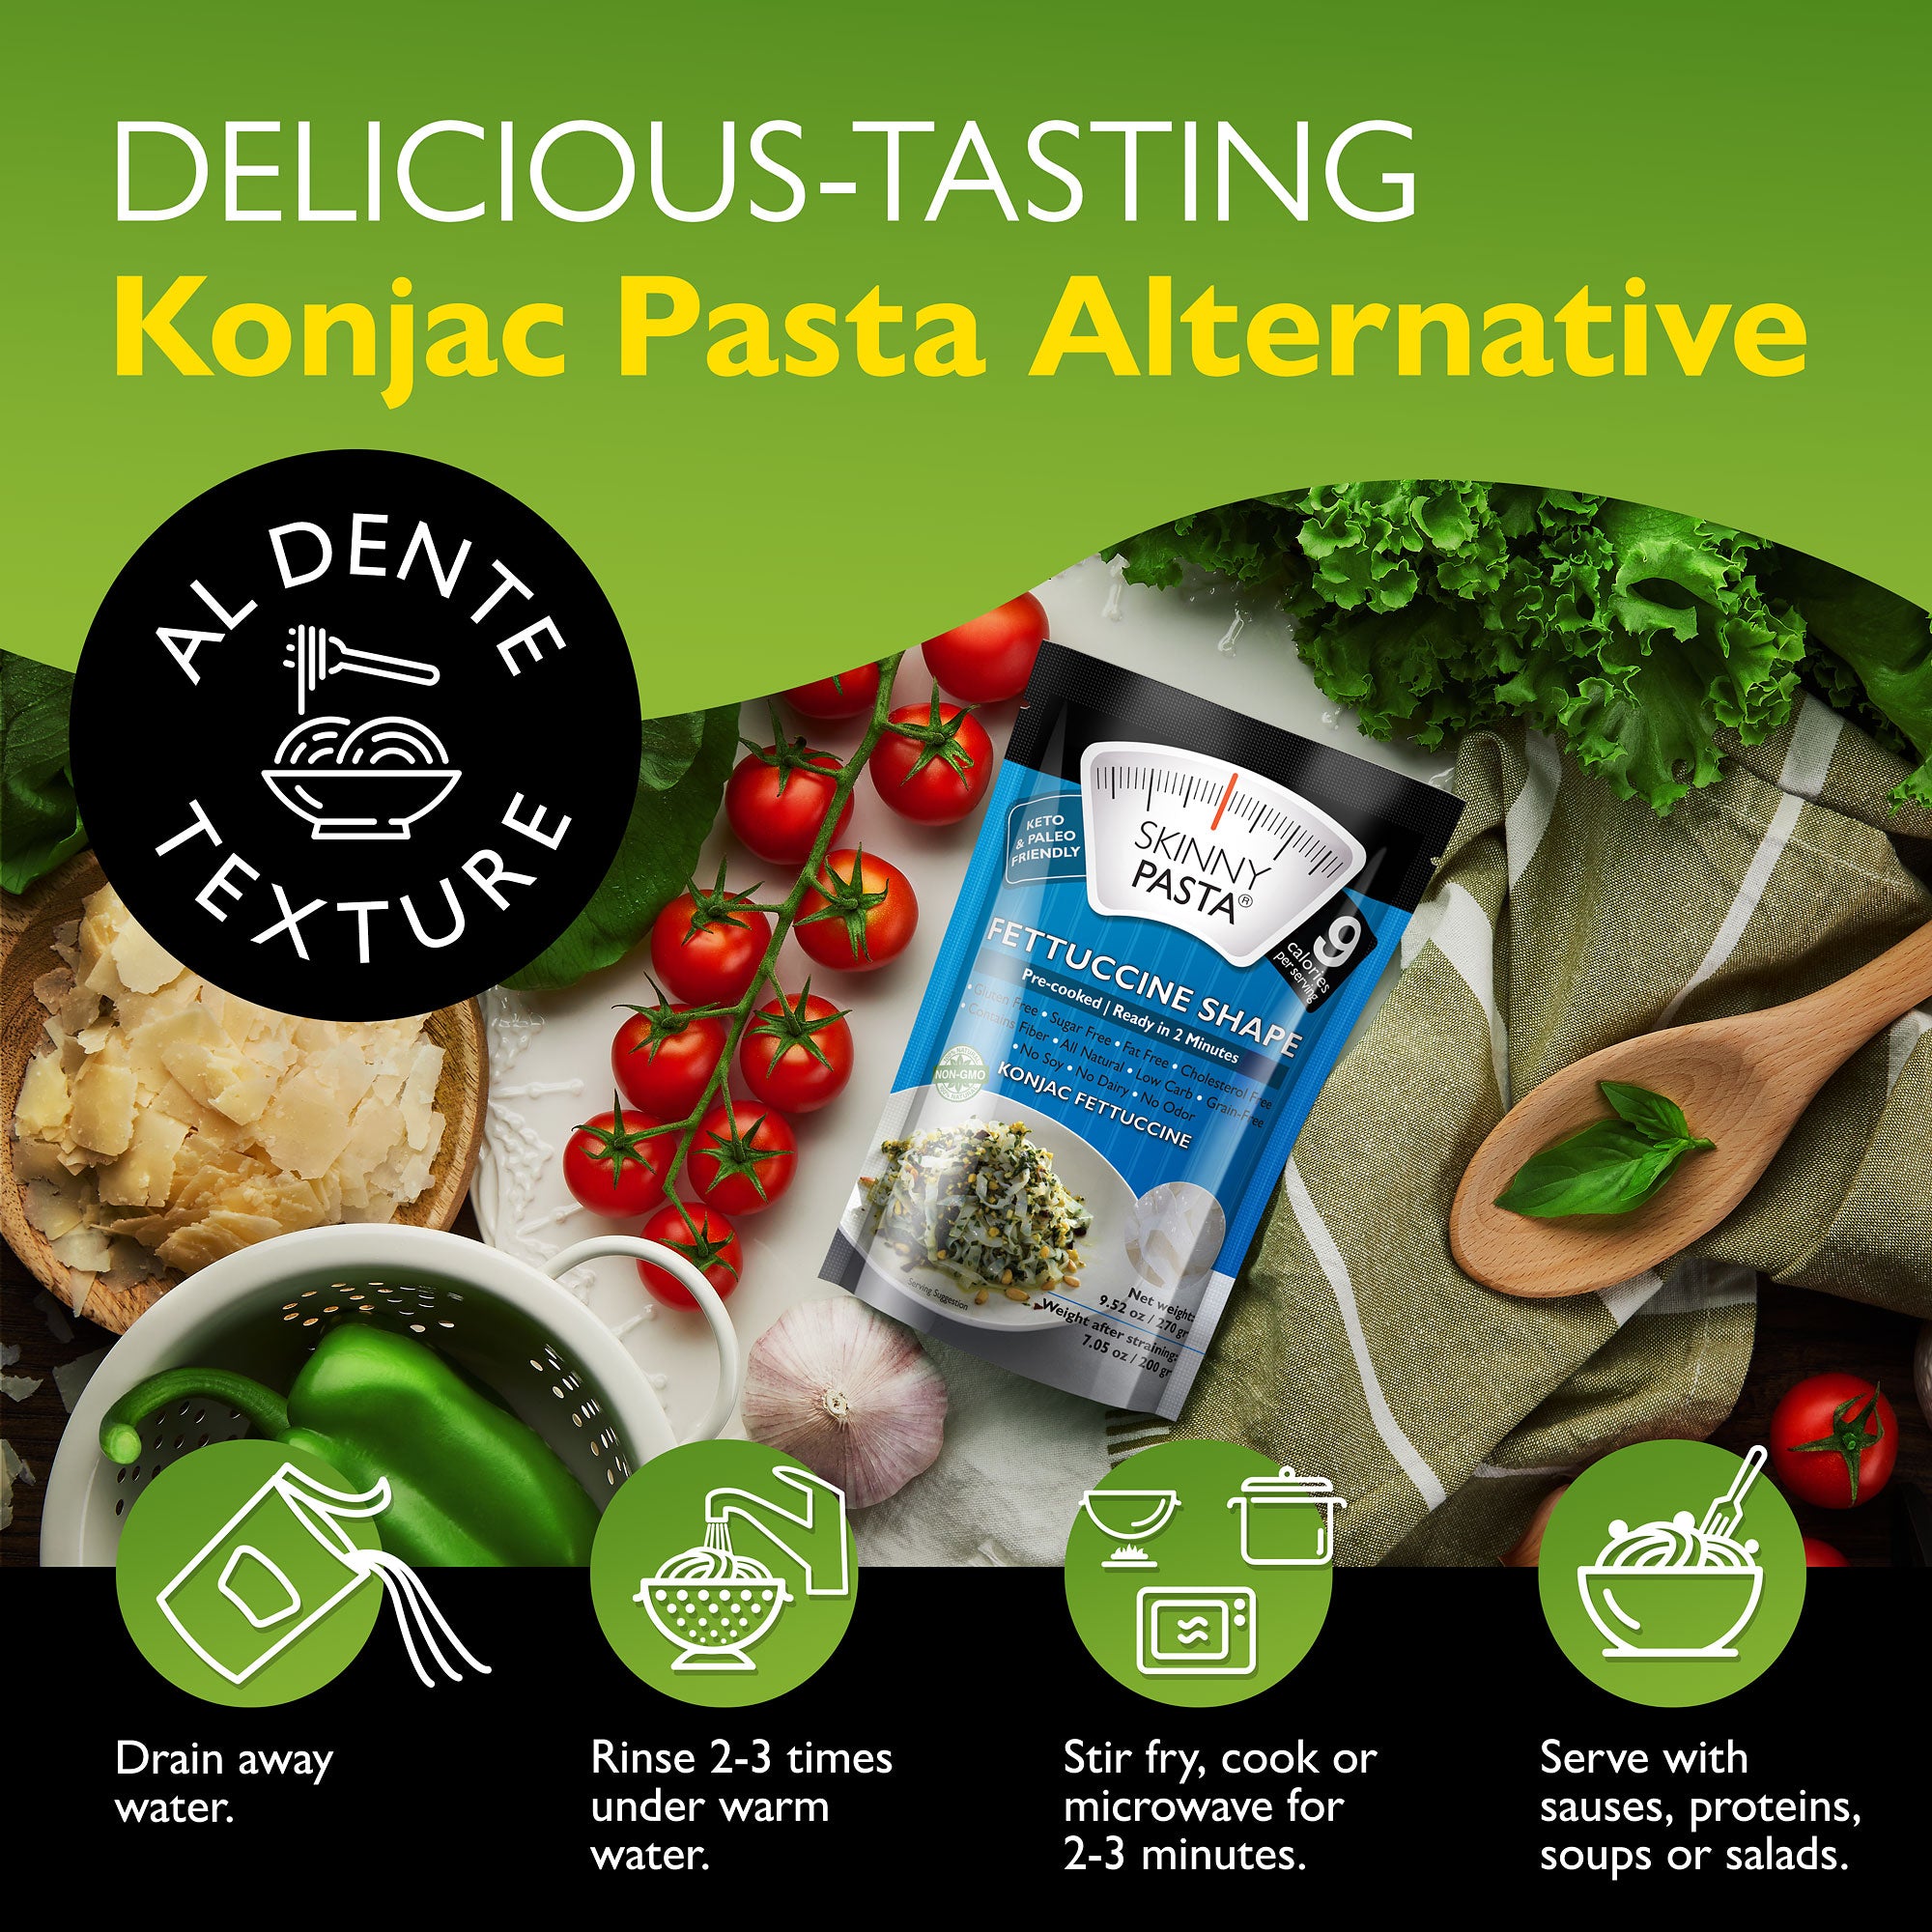 Skinny Pasta 9.52 oz - The Only Odor Free 100% Konjac Noodle - Low Calorie Food - Fettuccine - 24 Pack